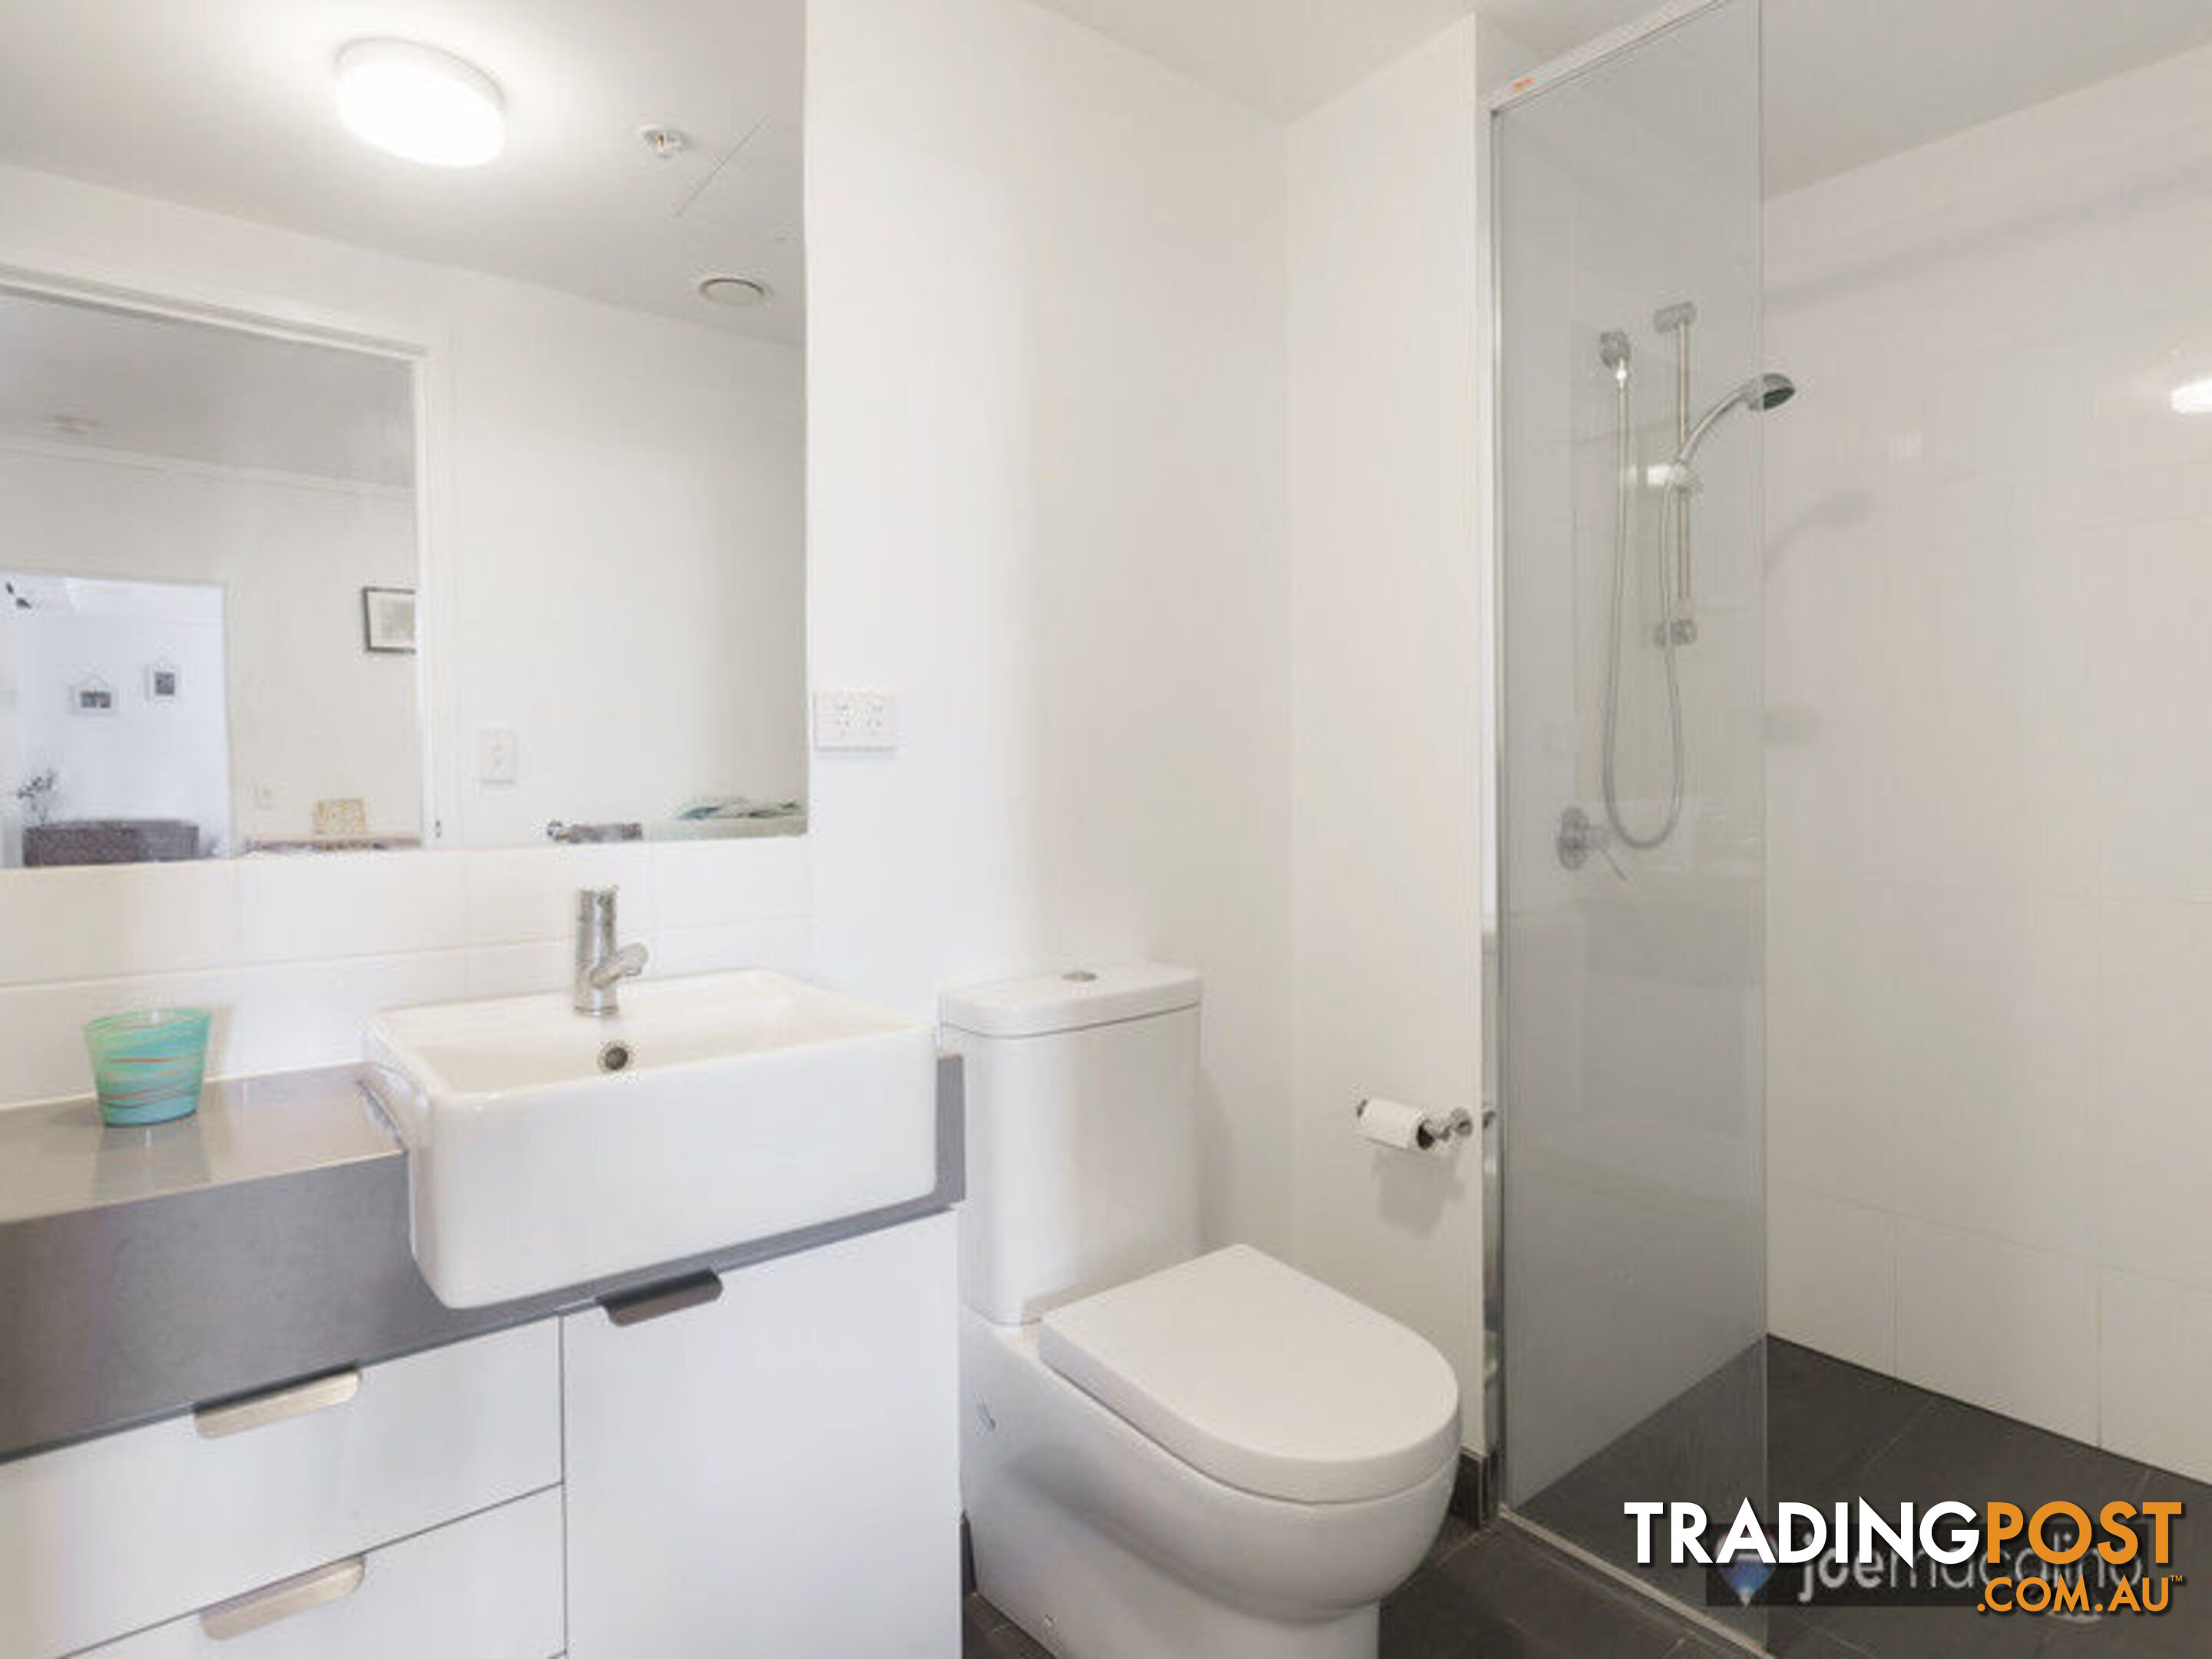 L4/25 Connor St FORTITUDE VALLEY QLD 4006